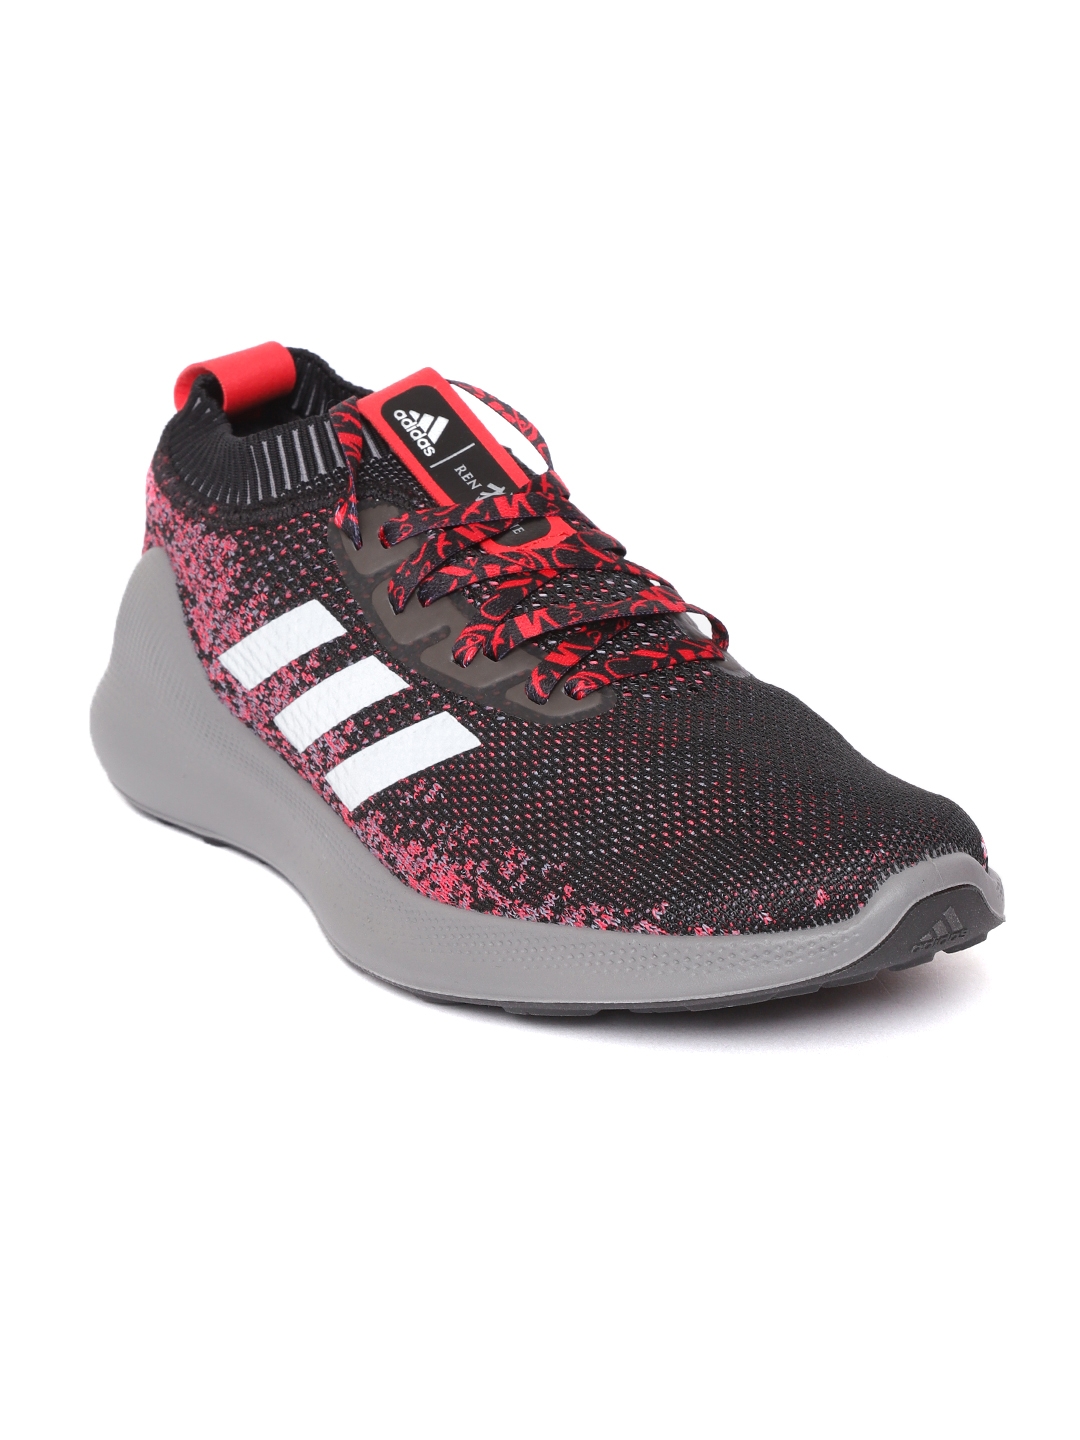 adidas pure bounce shoes